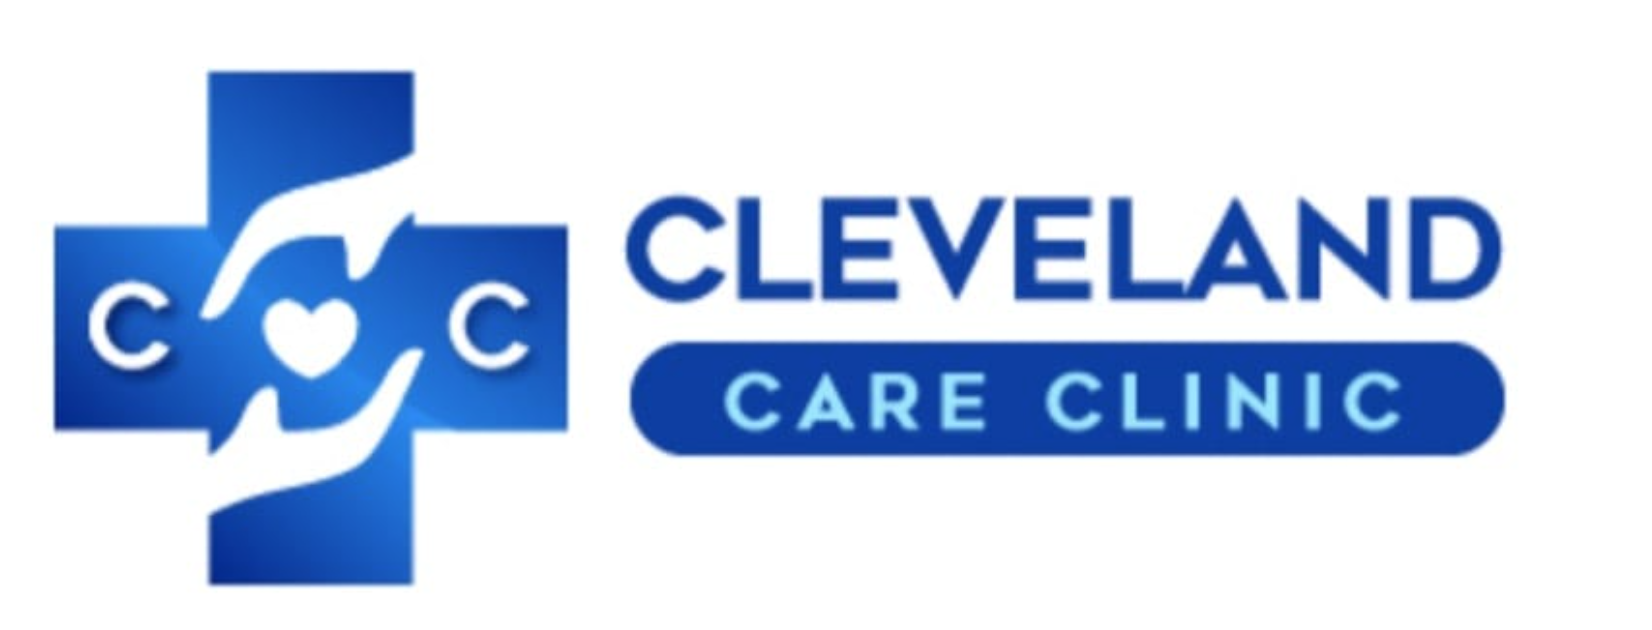 Cleveland Care Clinic